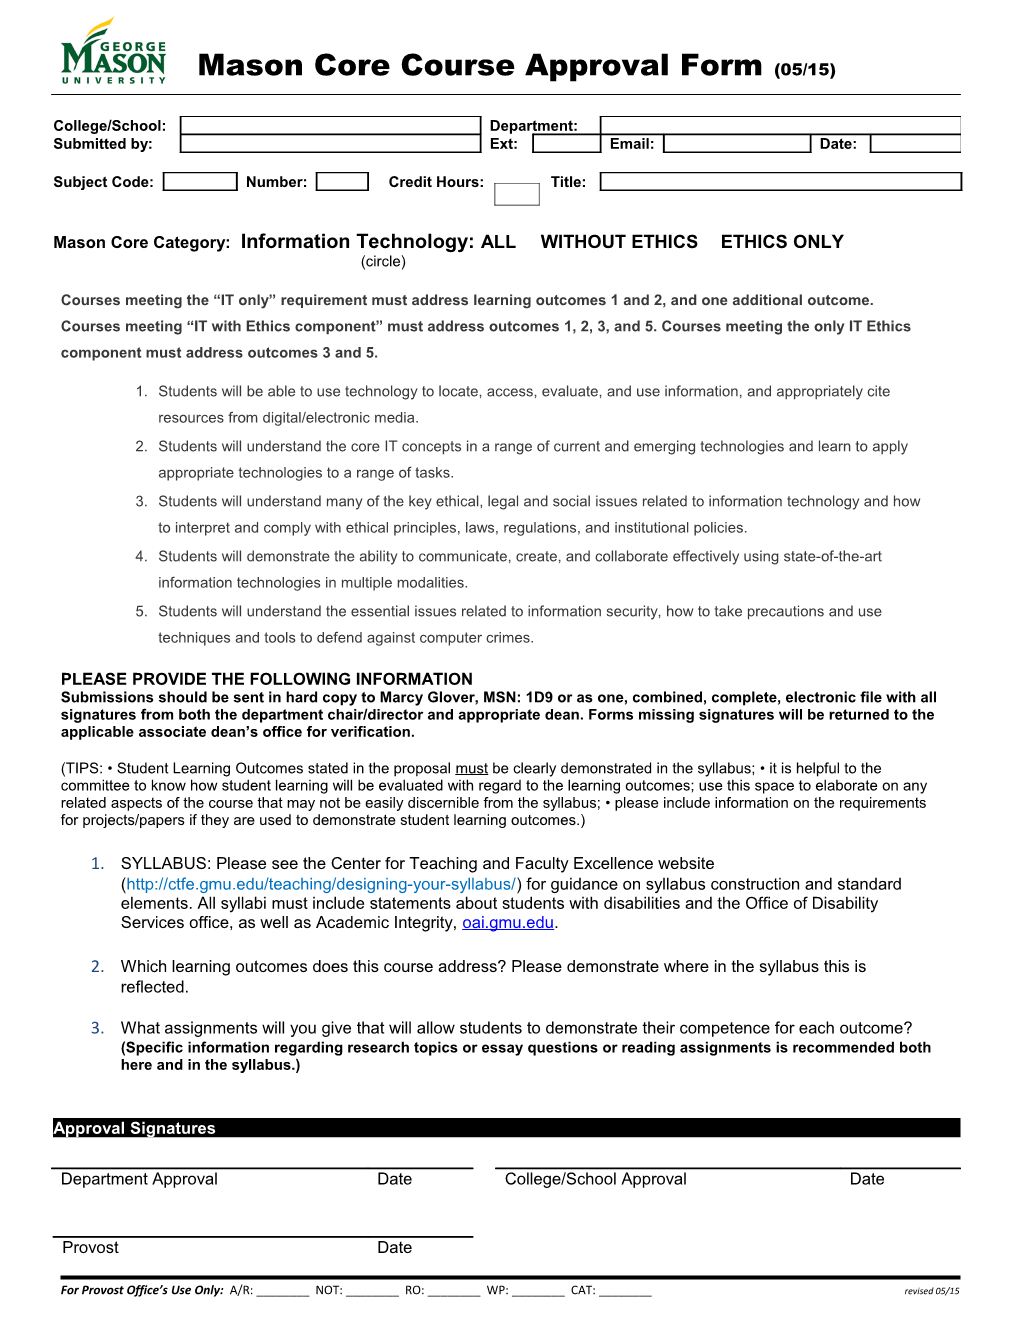 Course Approval Form s3